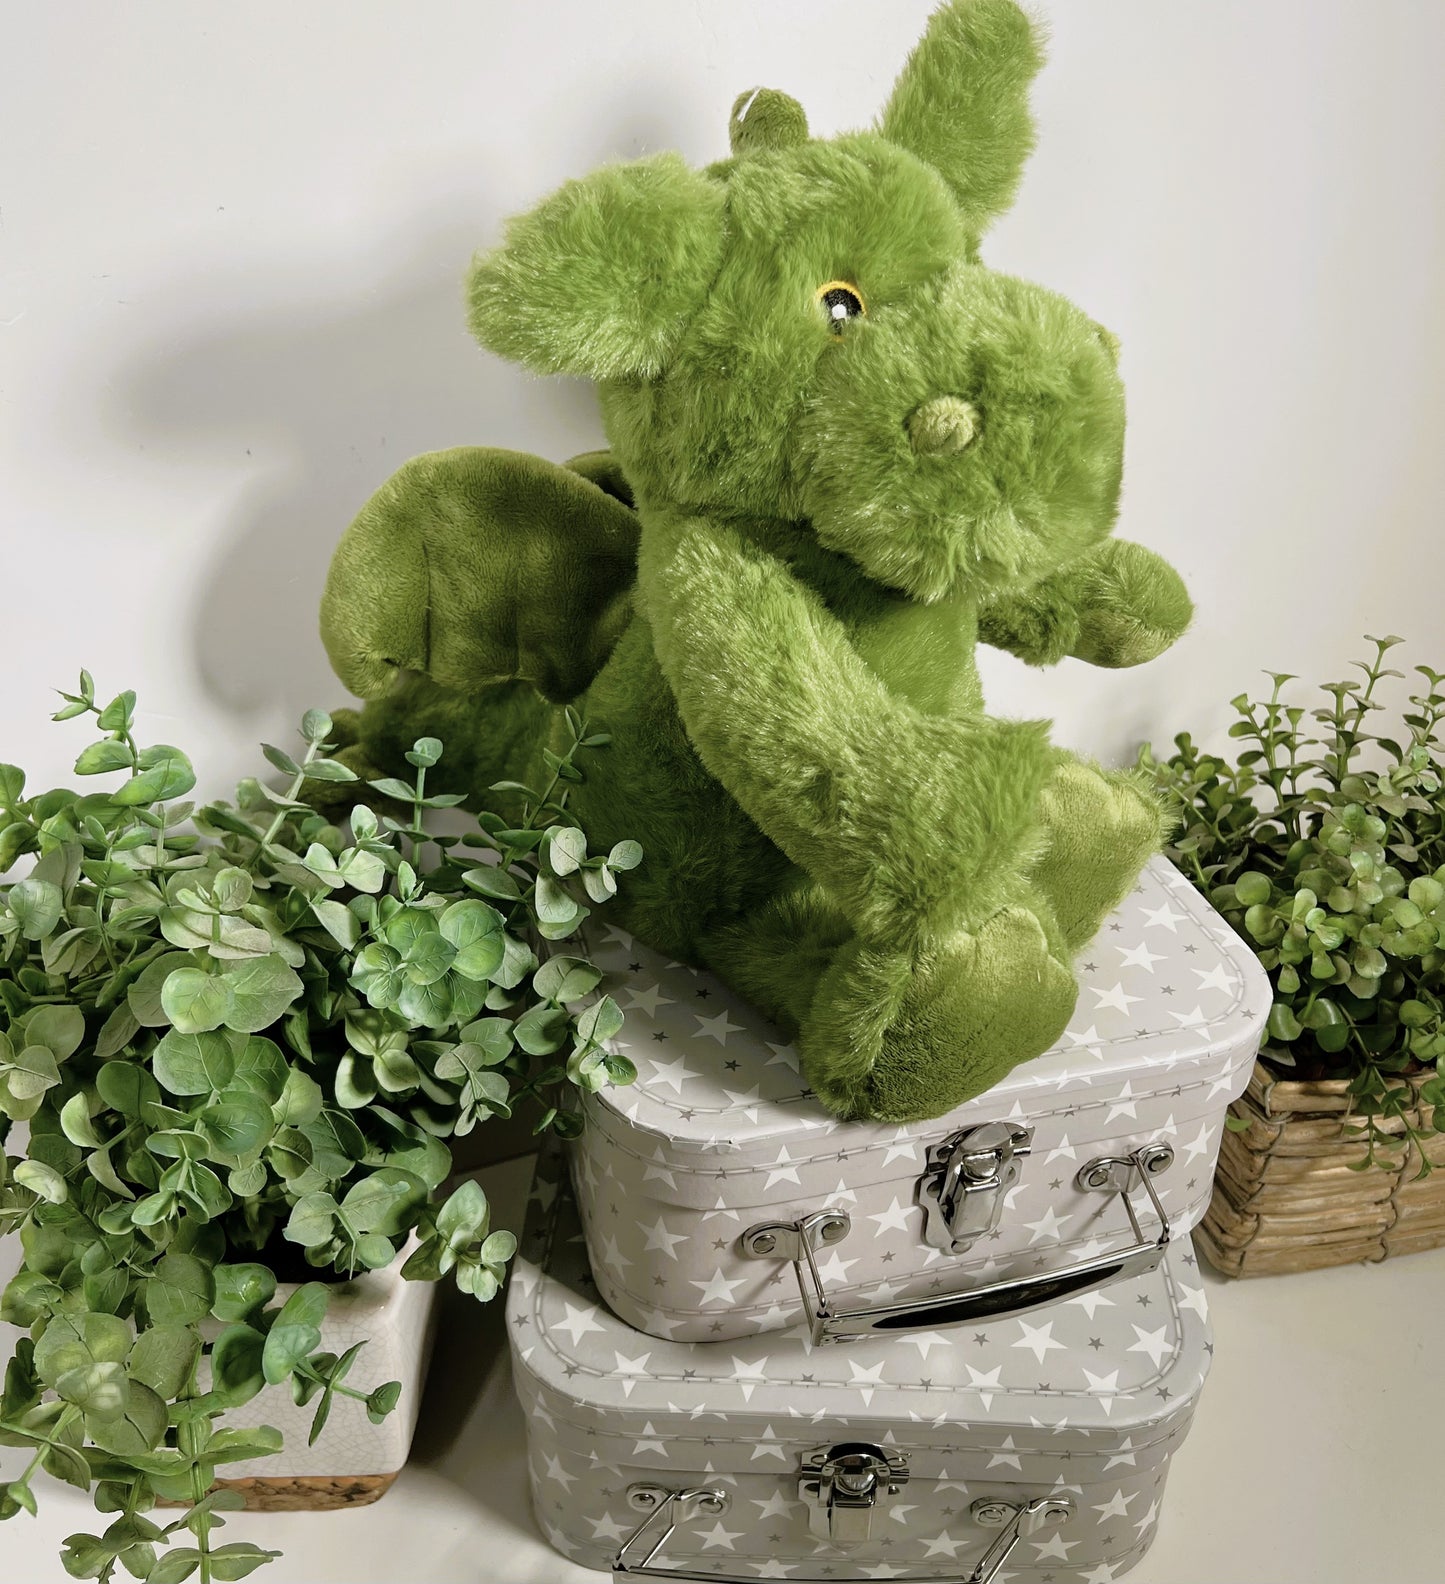 A Wilberry dragon soft toy